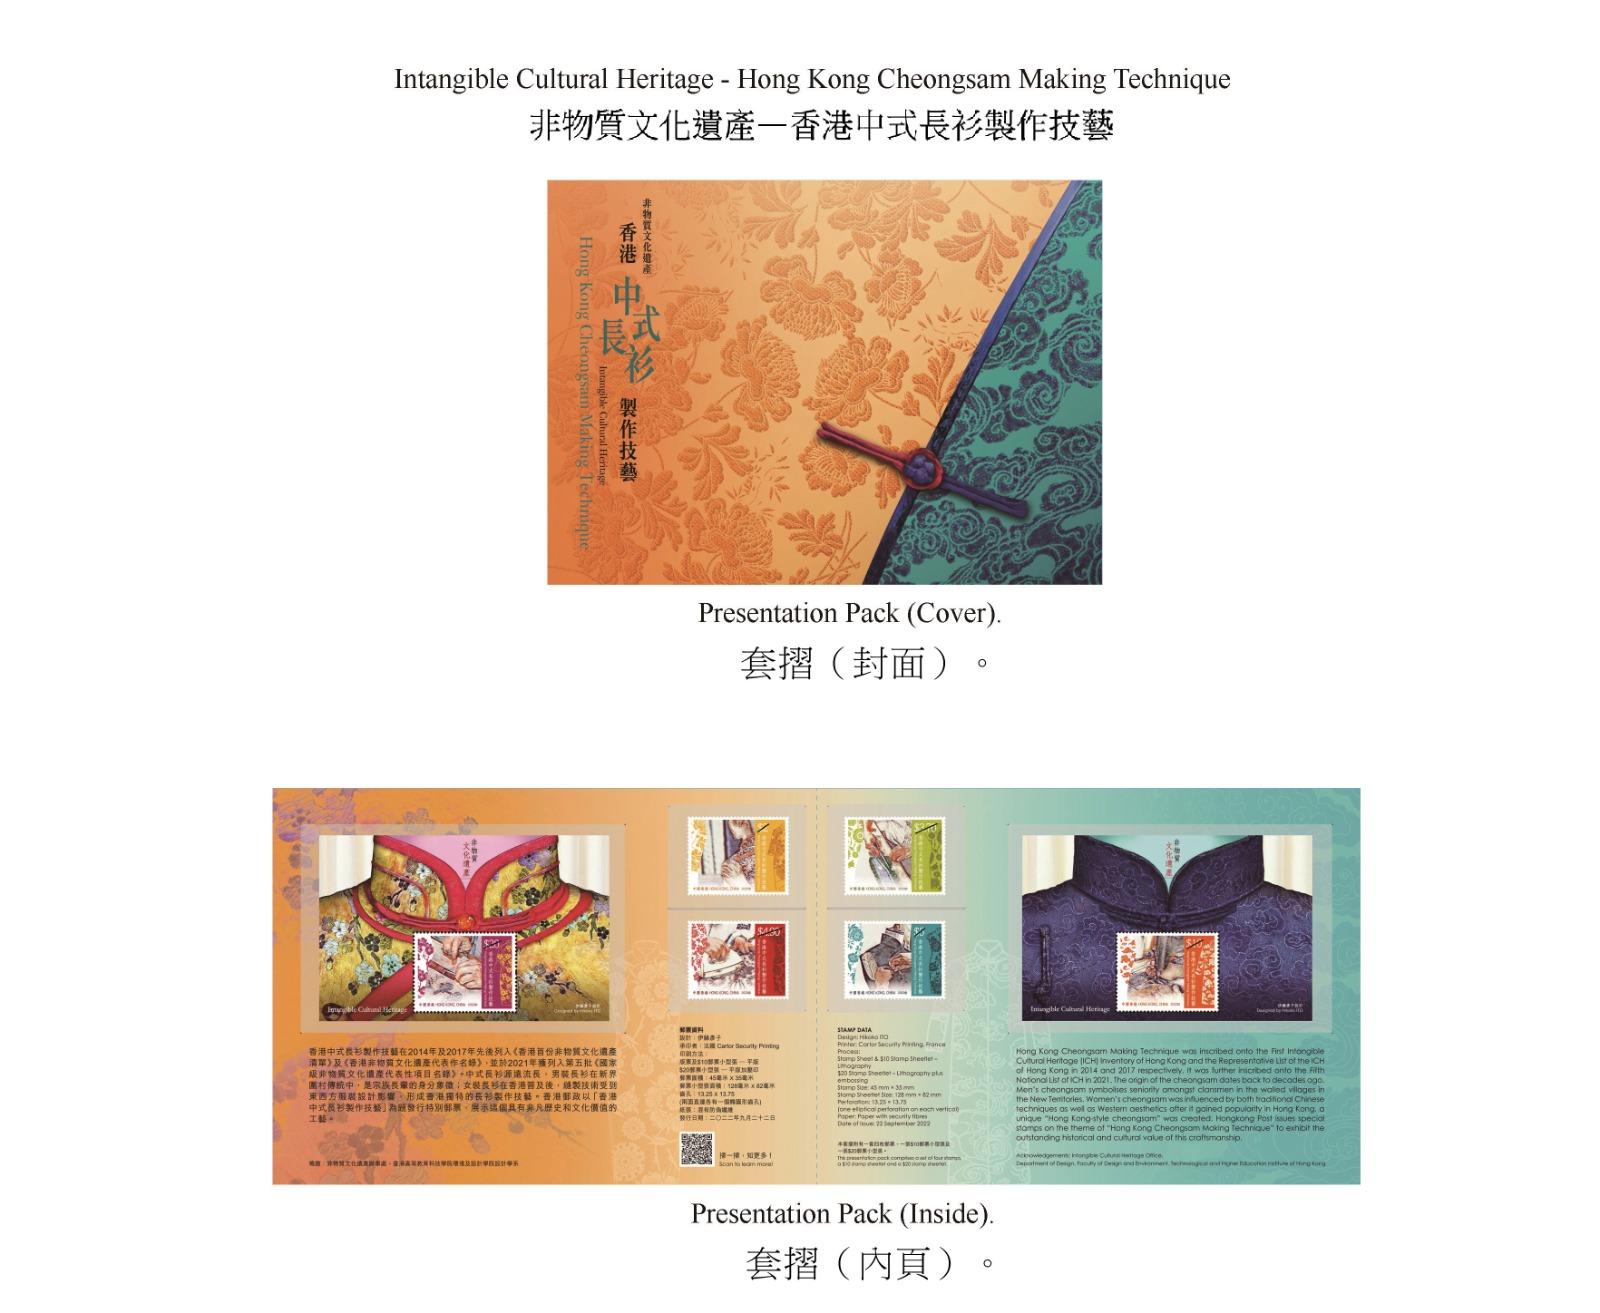 Hongkong Post will launch a special stamp issue and associated philatelic products on the theme of "Intangible Cultural Heritage – Hong Kong Cheongsam Making Technique" on September 22 (Thursday). Photo shows the presentation pack.